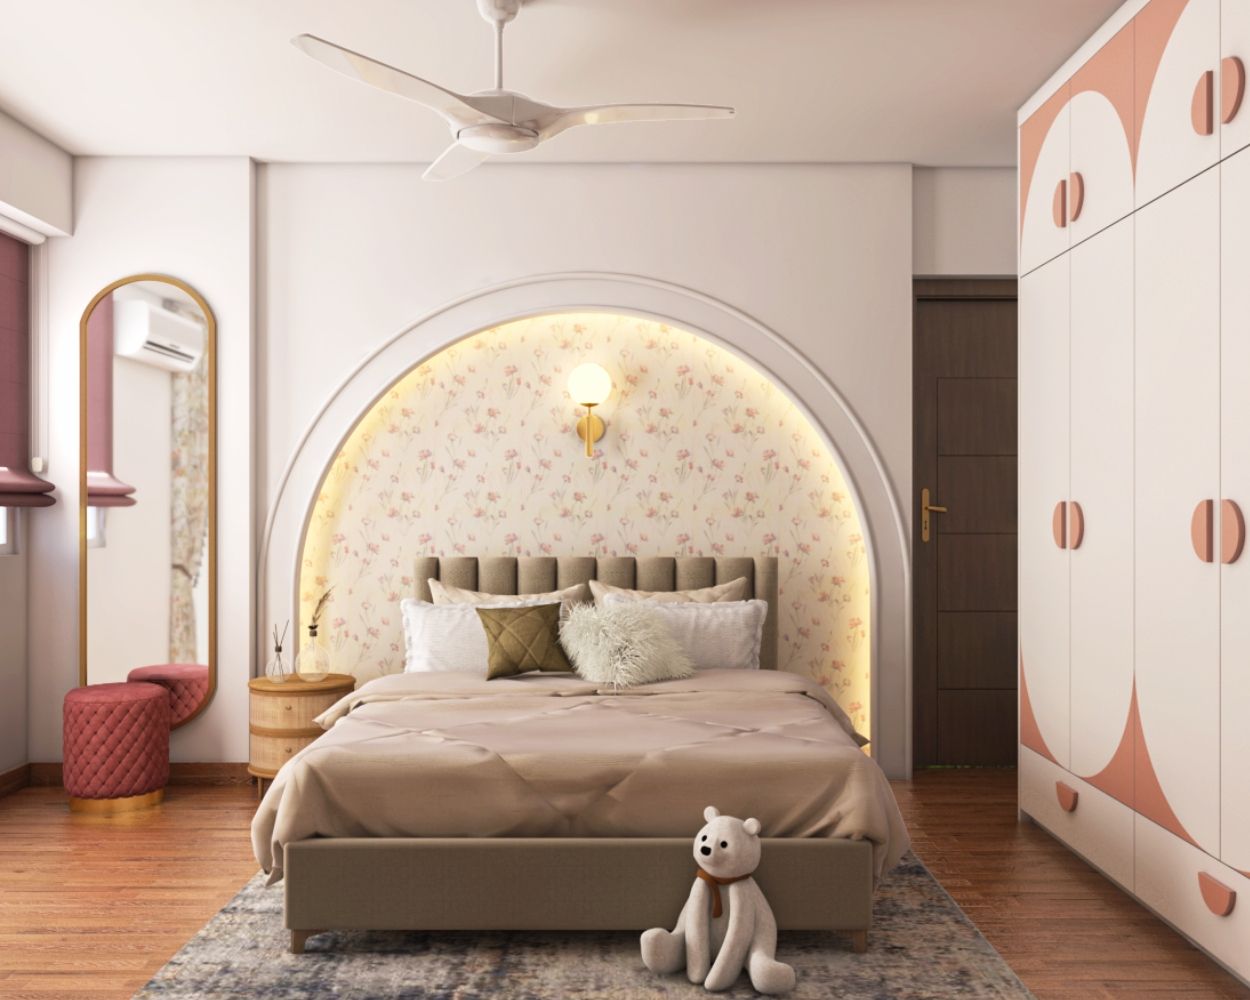 Art Deco Kids Room Design For Girls With Wall Arch And Beige Floral Wallpaper